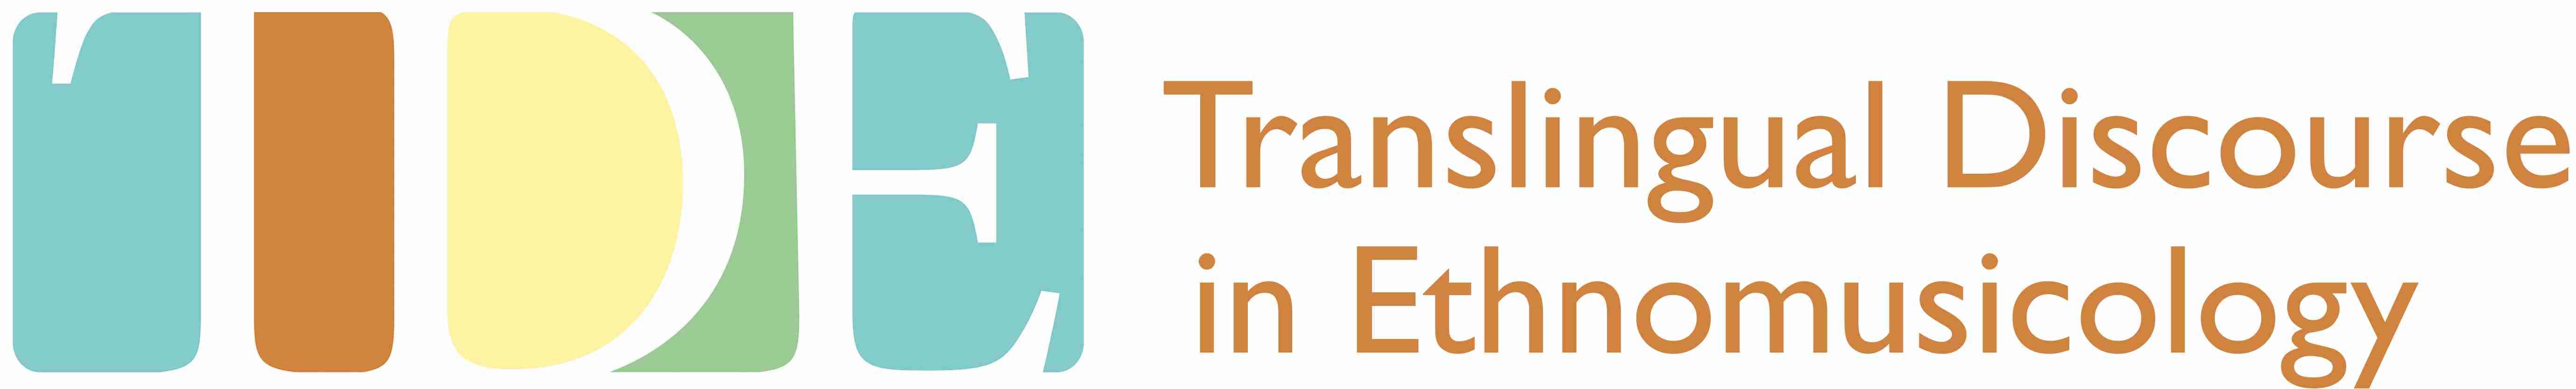 Translingual Discourse in Ethnomusicology